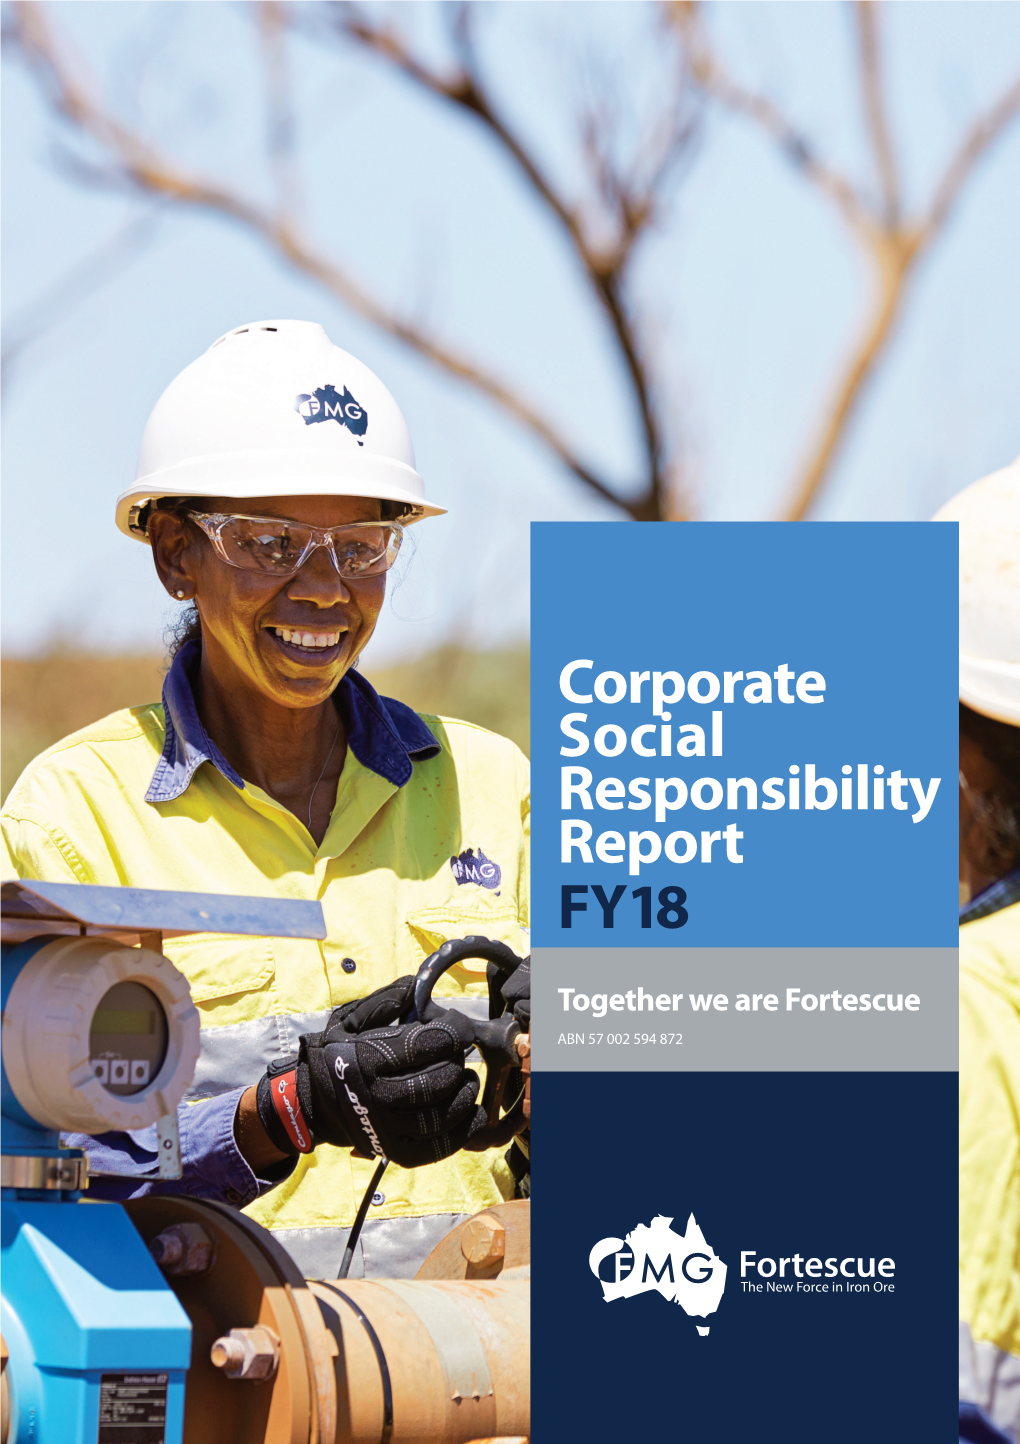 Corporate Social Responsibility Report FY18 ABN 57002594872 Together We Are Fortescue FY18 Report Responsibility Social Corporate